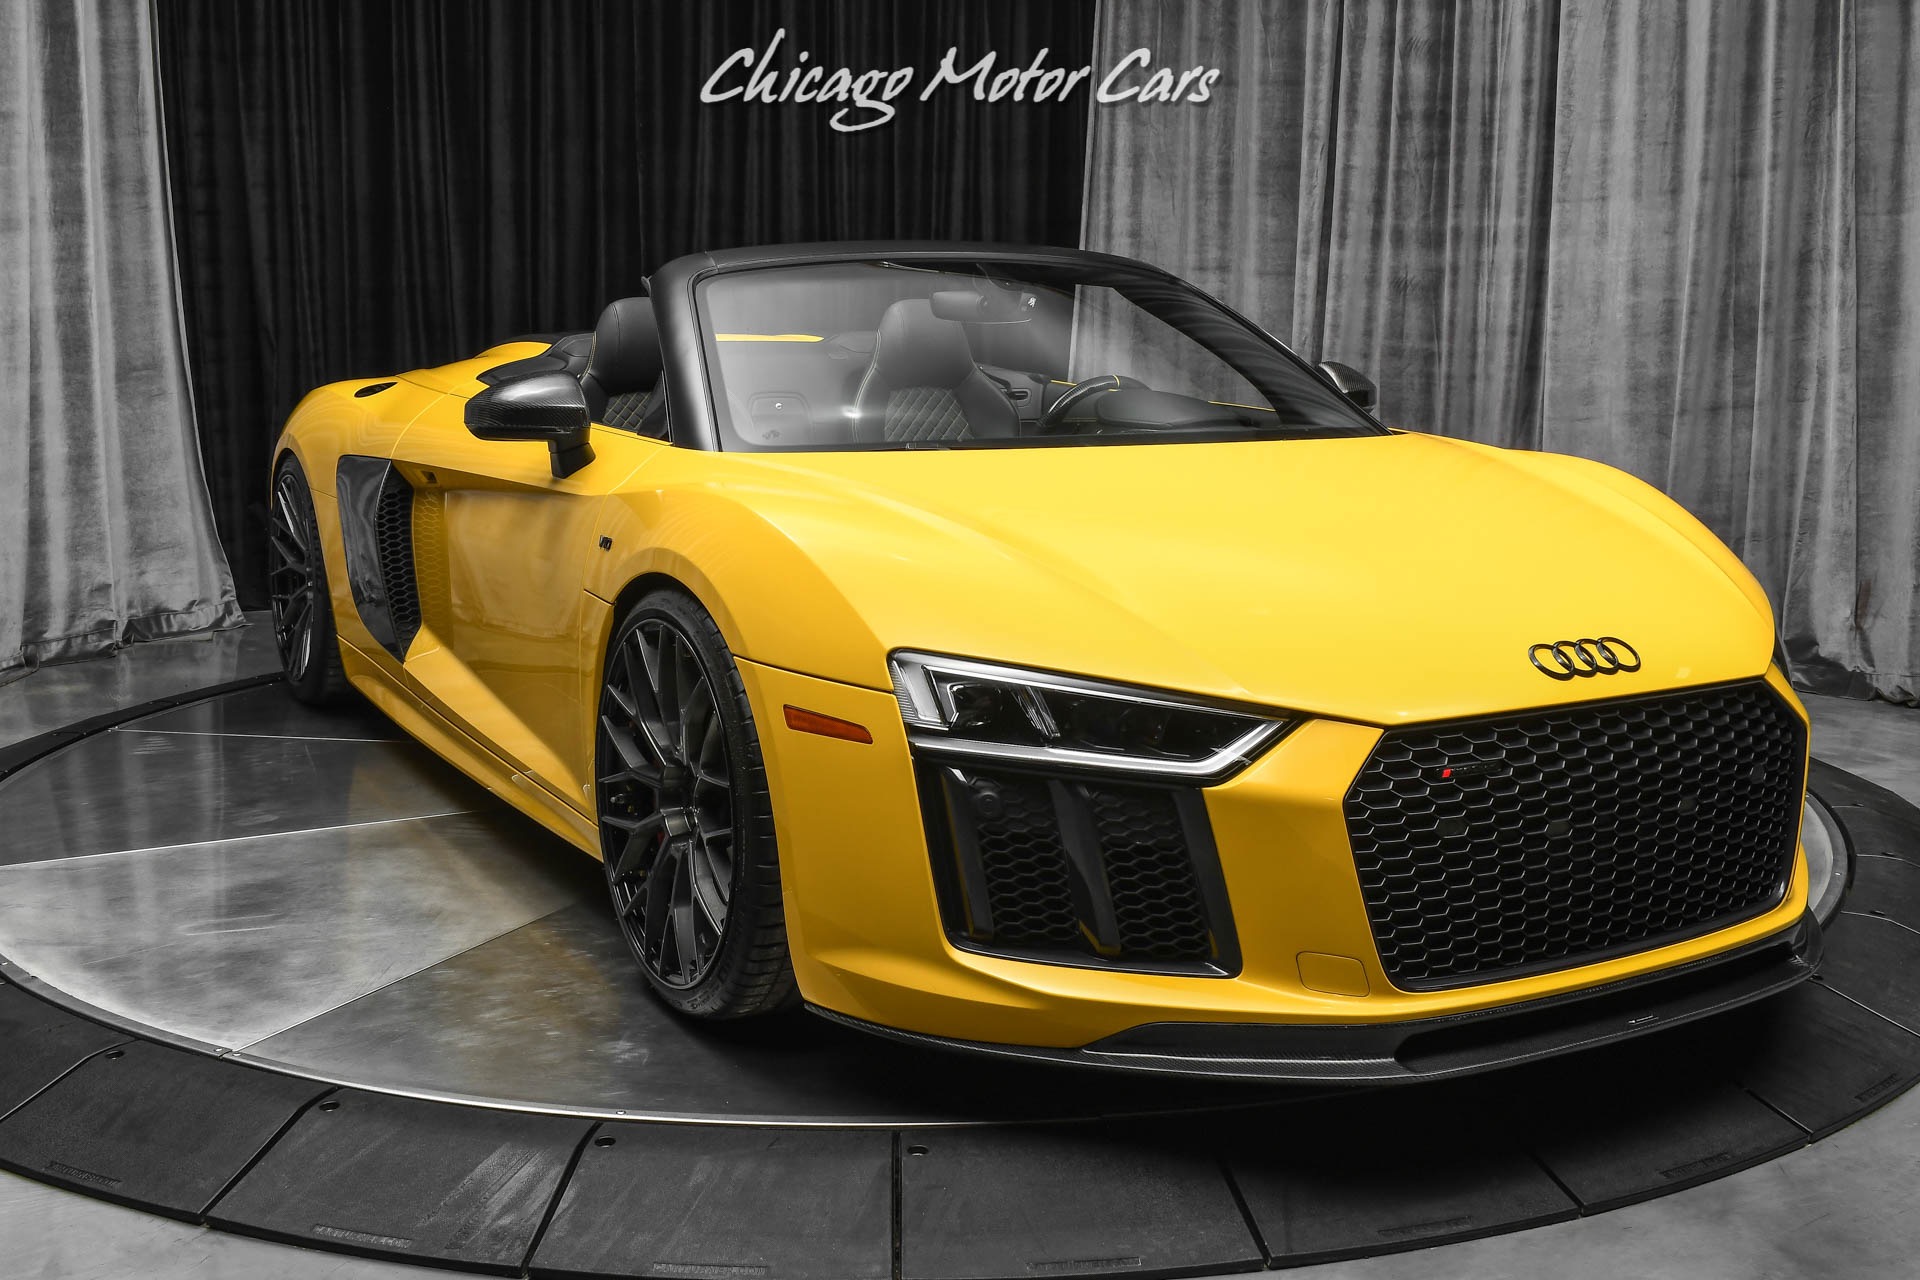 Used-2017-Audi-R8-52-quattro-V10-Spyder-TASTEFULLY-MODIFIED-TONS-OF-CARBON-6500-MILES